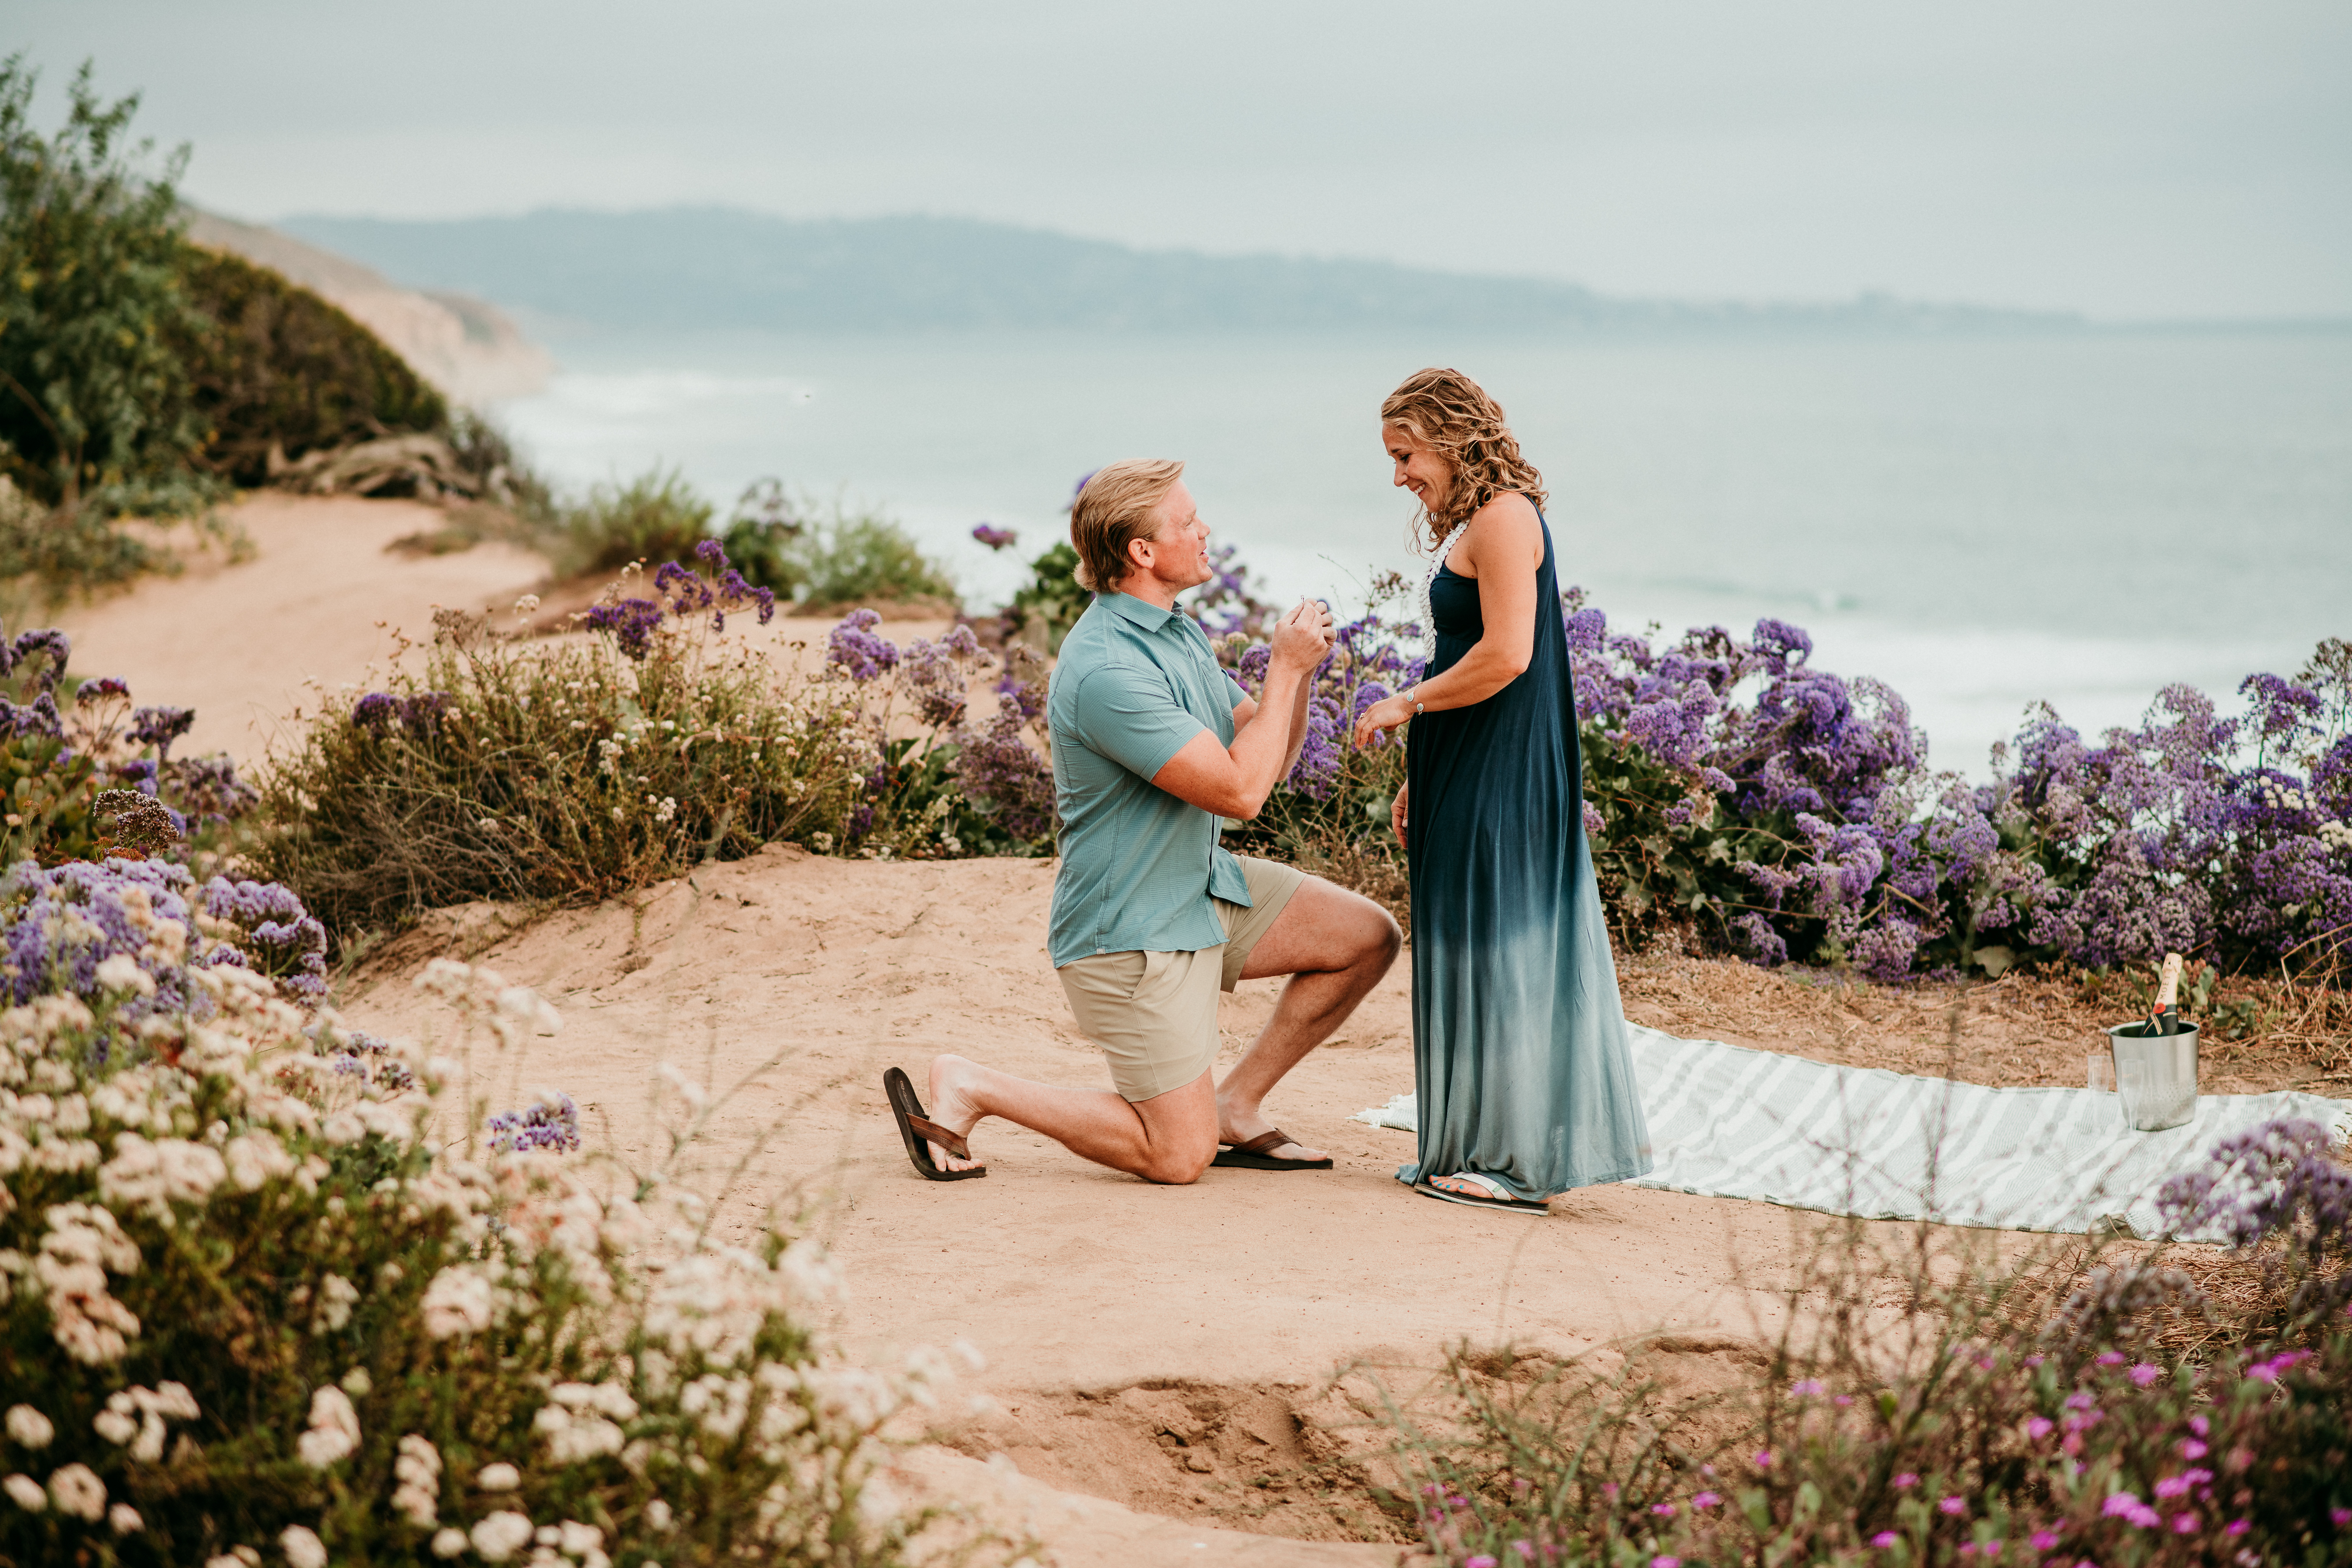 Man down on bended knee - proposing to his girlfriend up on the cliffs of San Diego's beautiful beaches